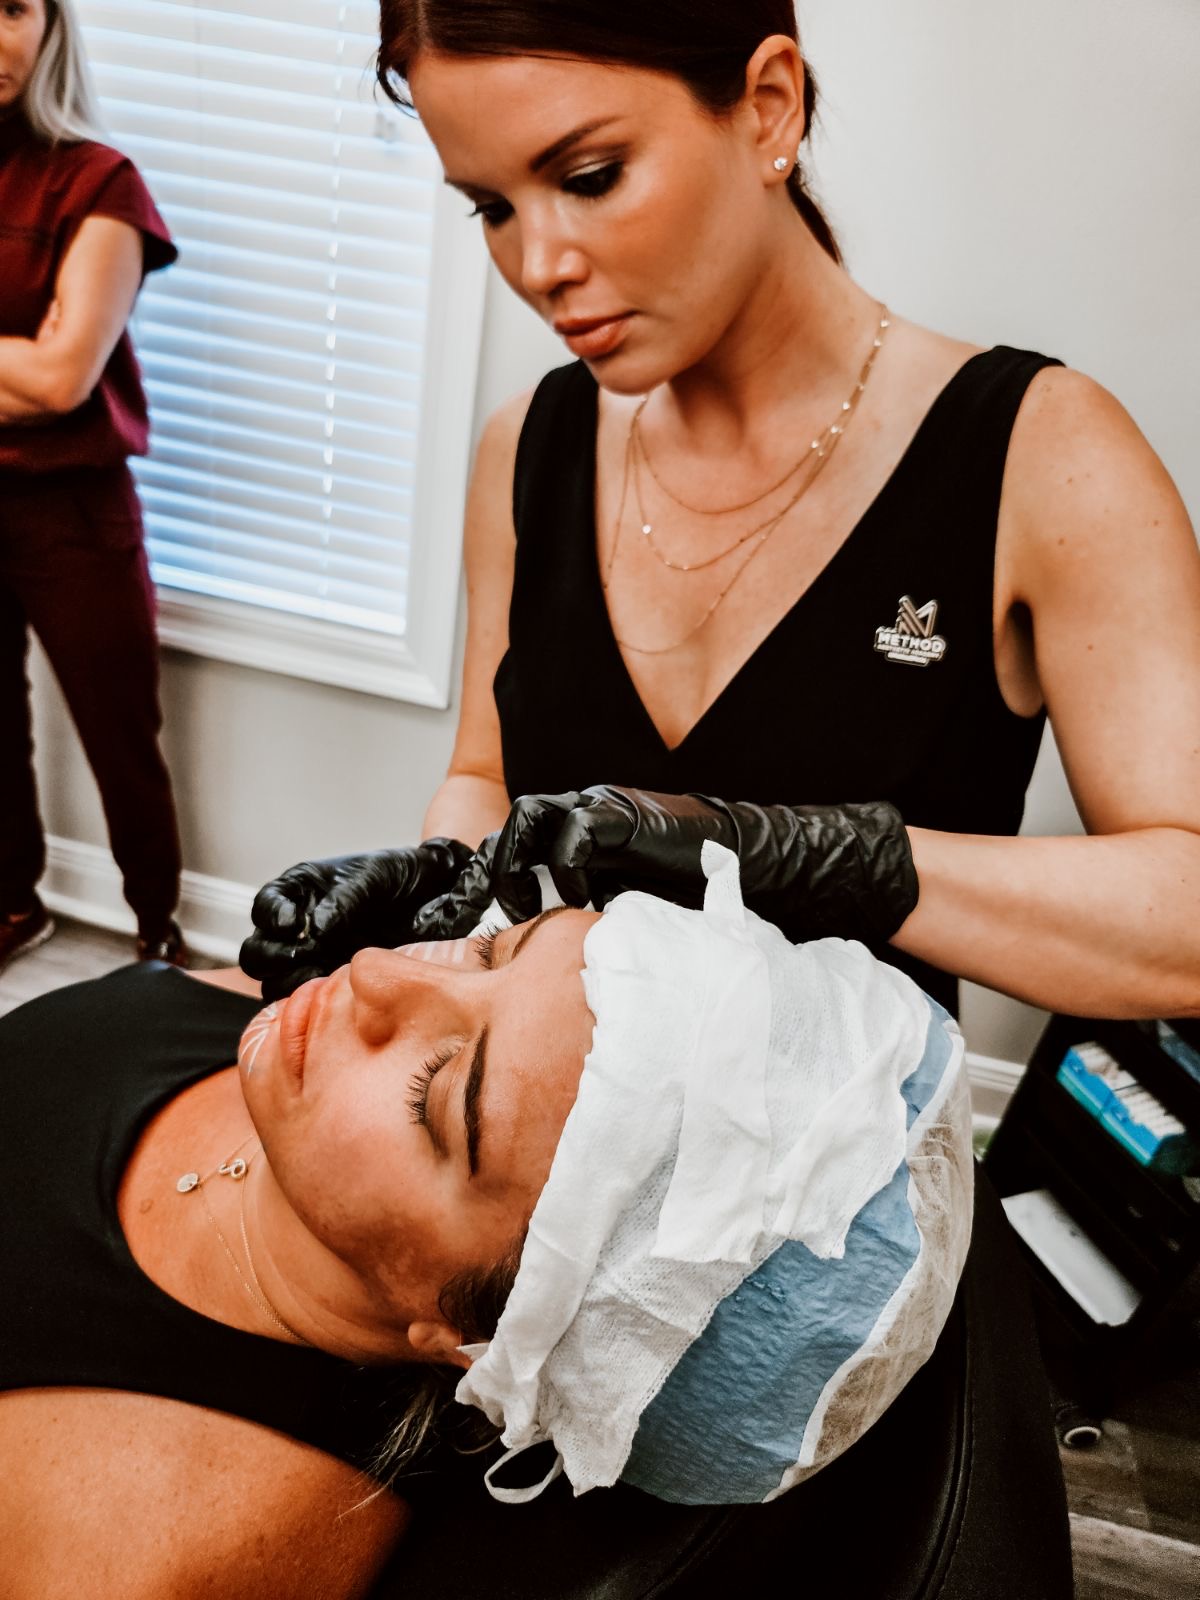 Unleashing Your Aesthetic Potential: Method Aesthetics Academy’s Approach to Training